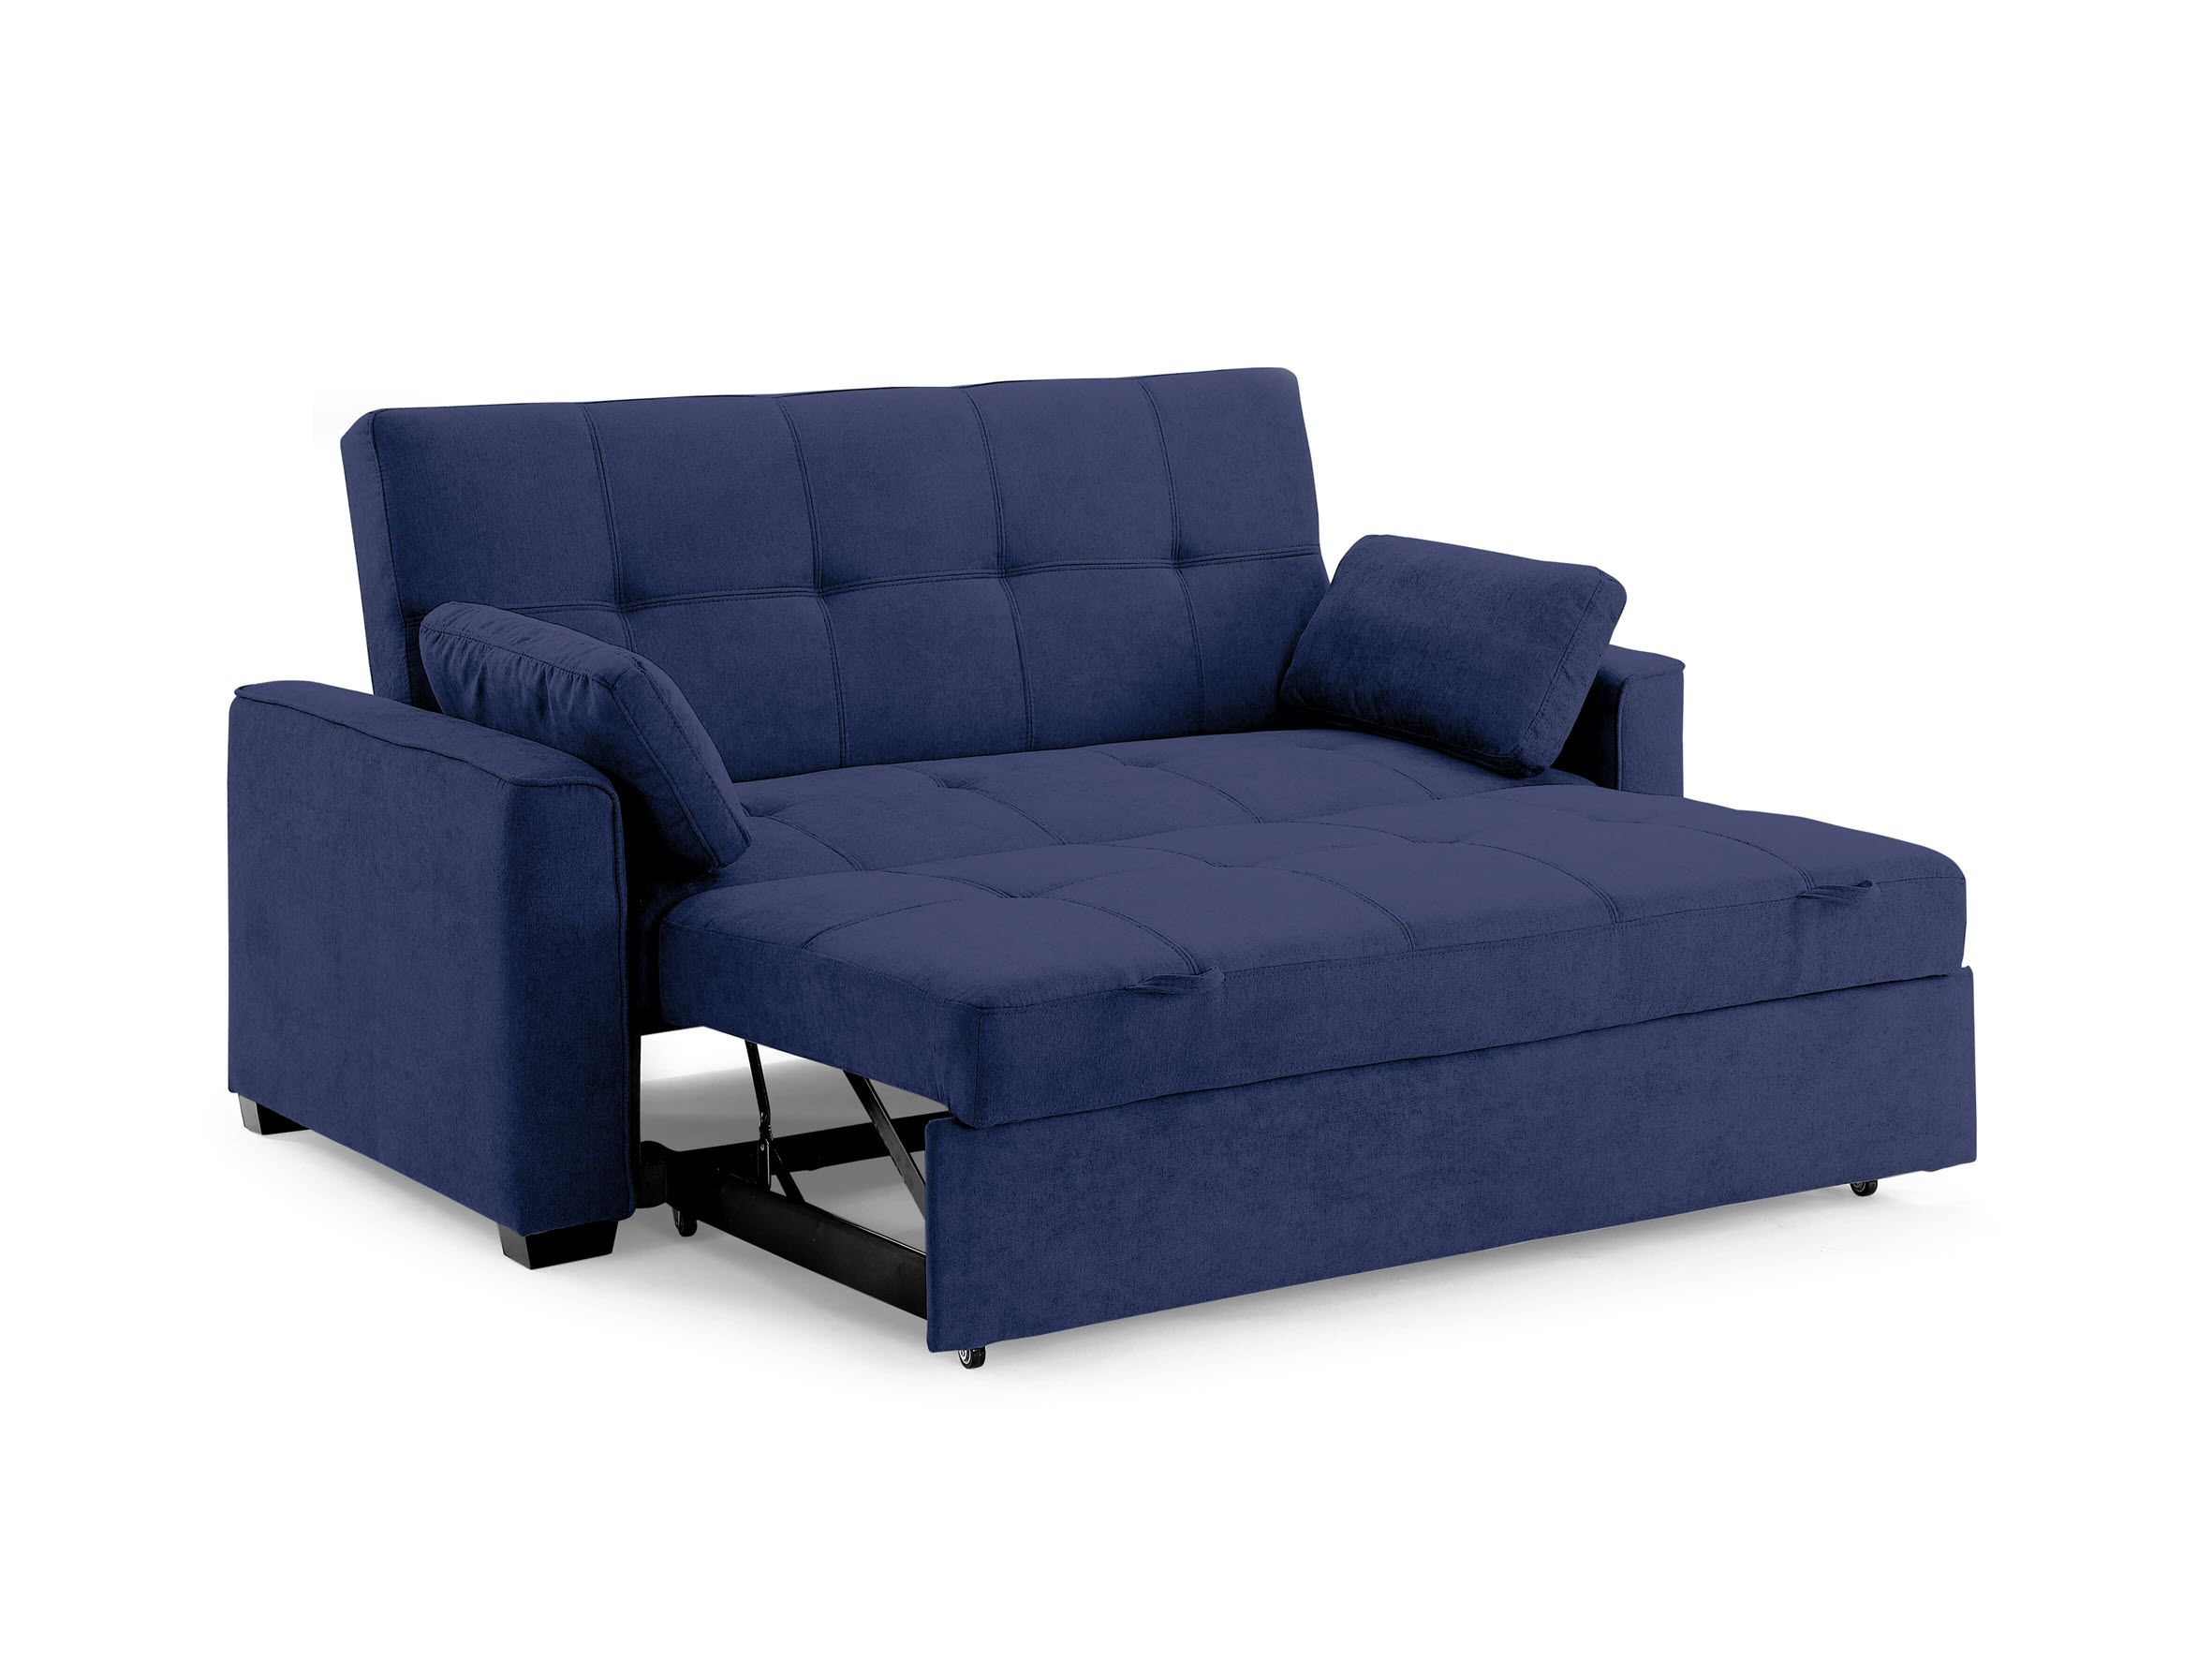 Cape Cod Nantucket Futon Sofa Sleeper Bed Navy Blue | Sleepworks With Navy Sleeper Sofa Couches (View 3 of 20)